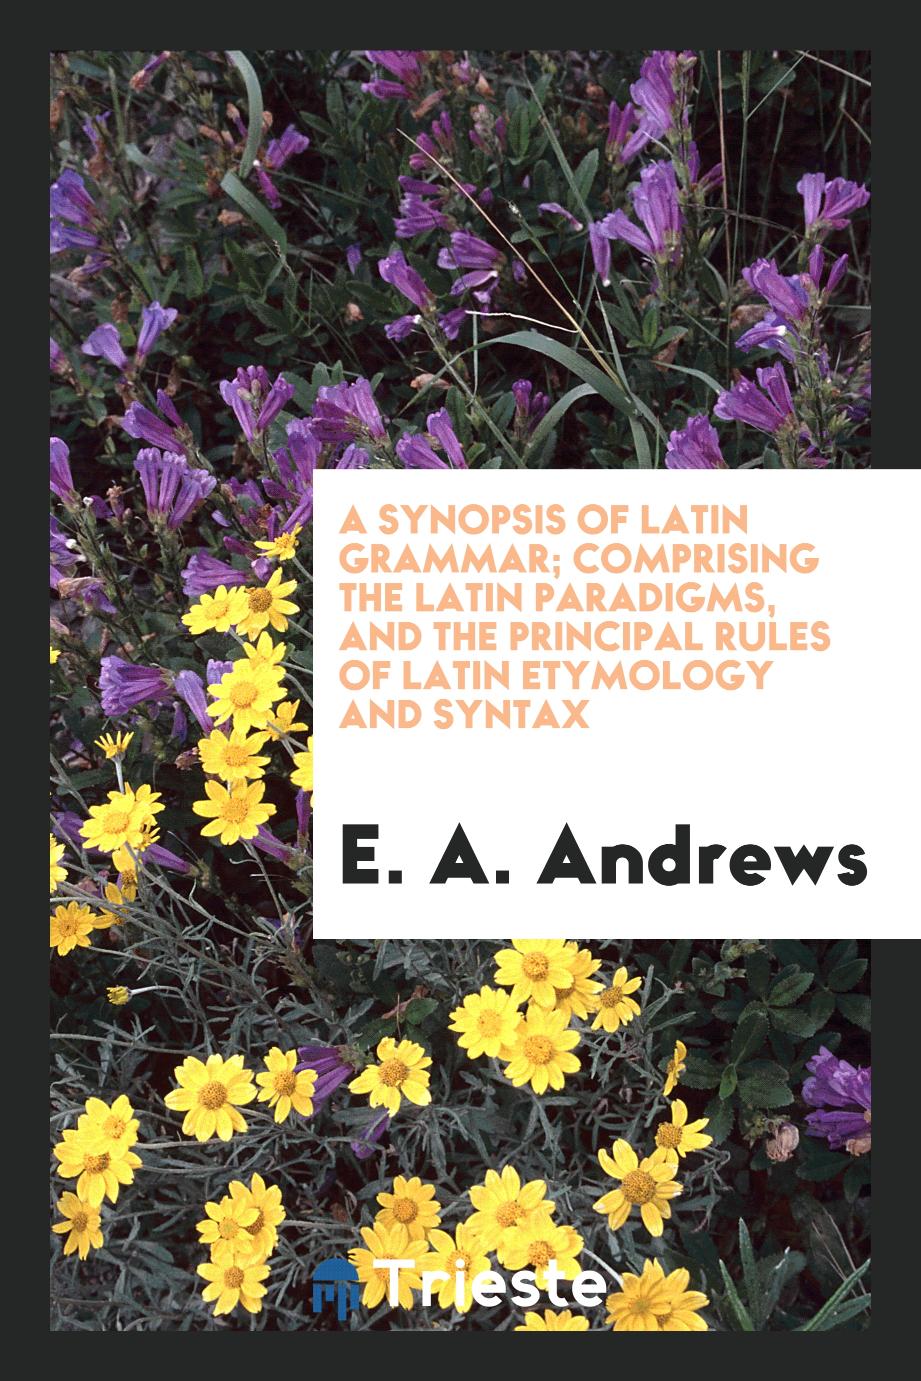 A Synopsis of Latin Grammar; Comprising the Latin Paradigms, and the Principal Rules of Latin etymology and syntax